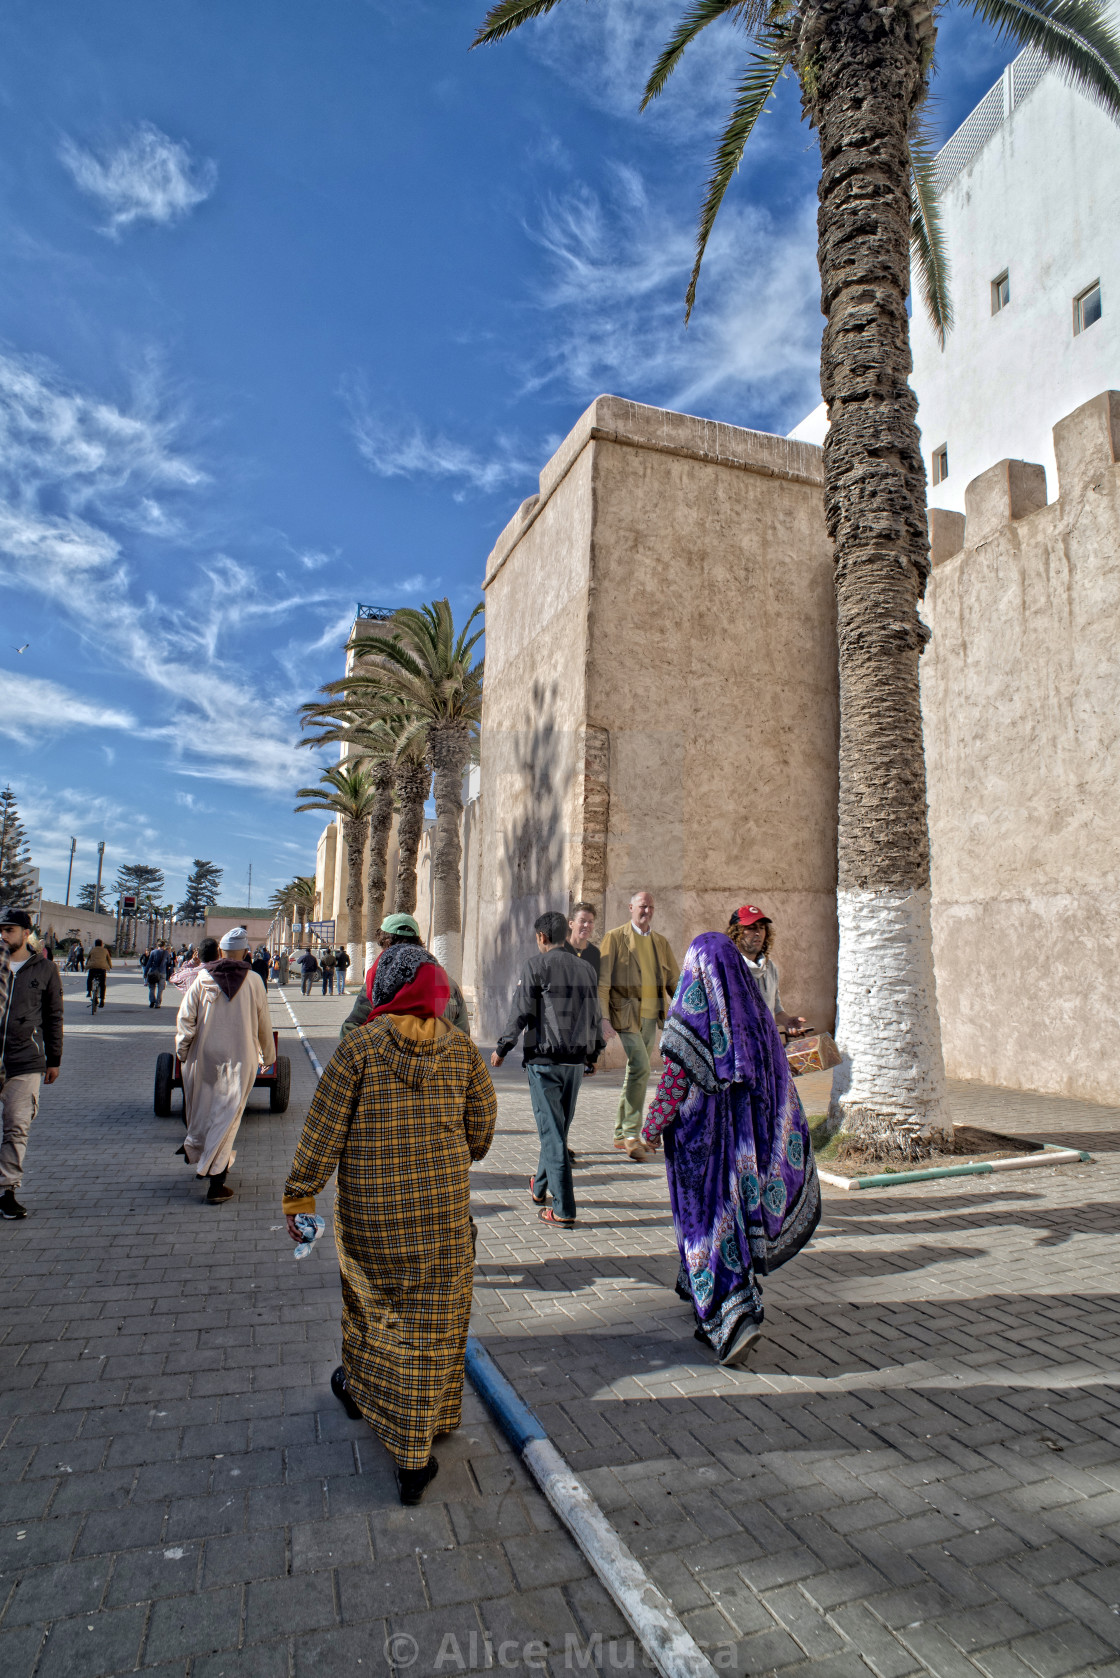 "People and palm trees - sunny street in Essaouira, Morocco" stock image